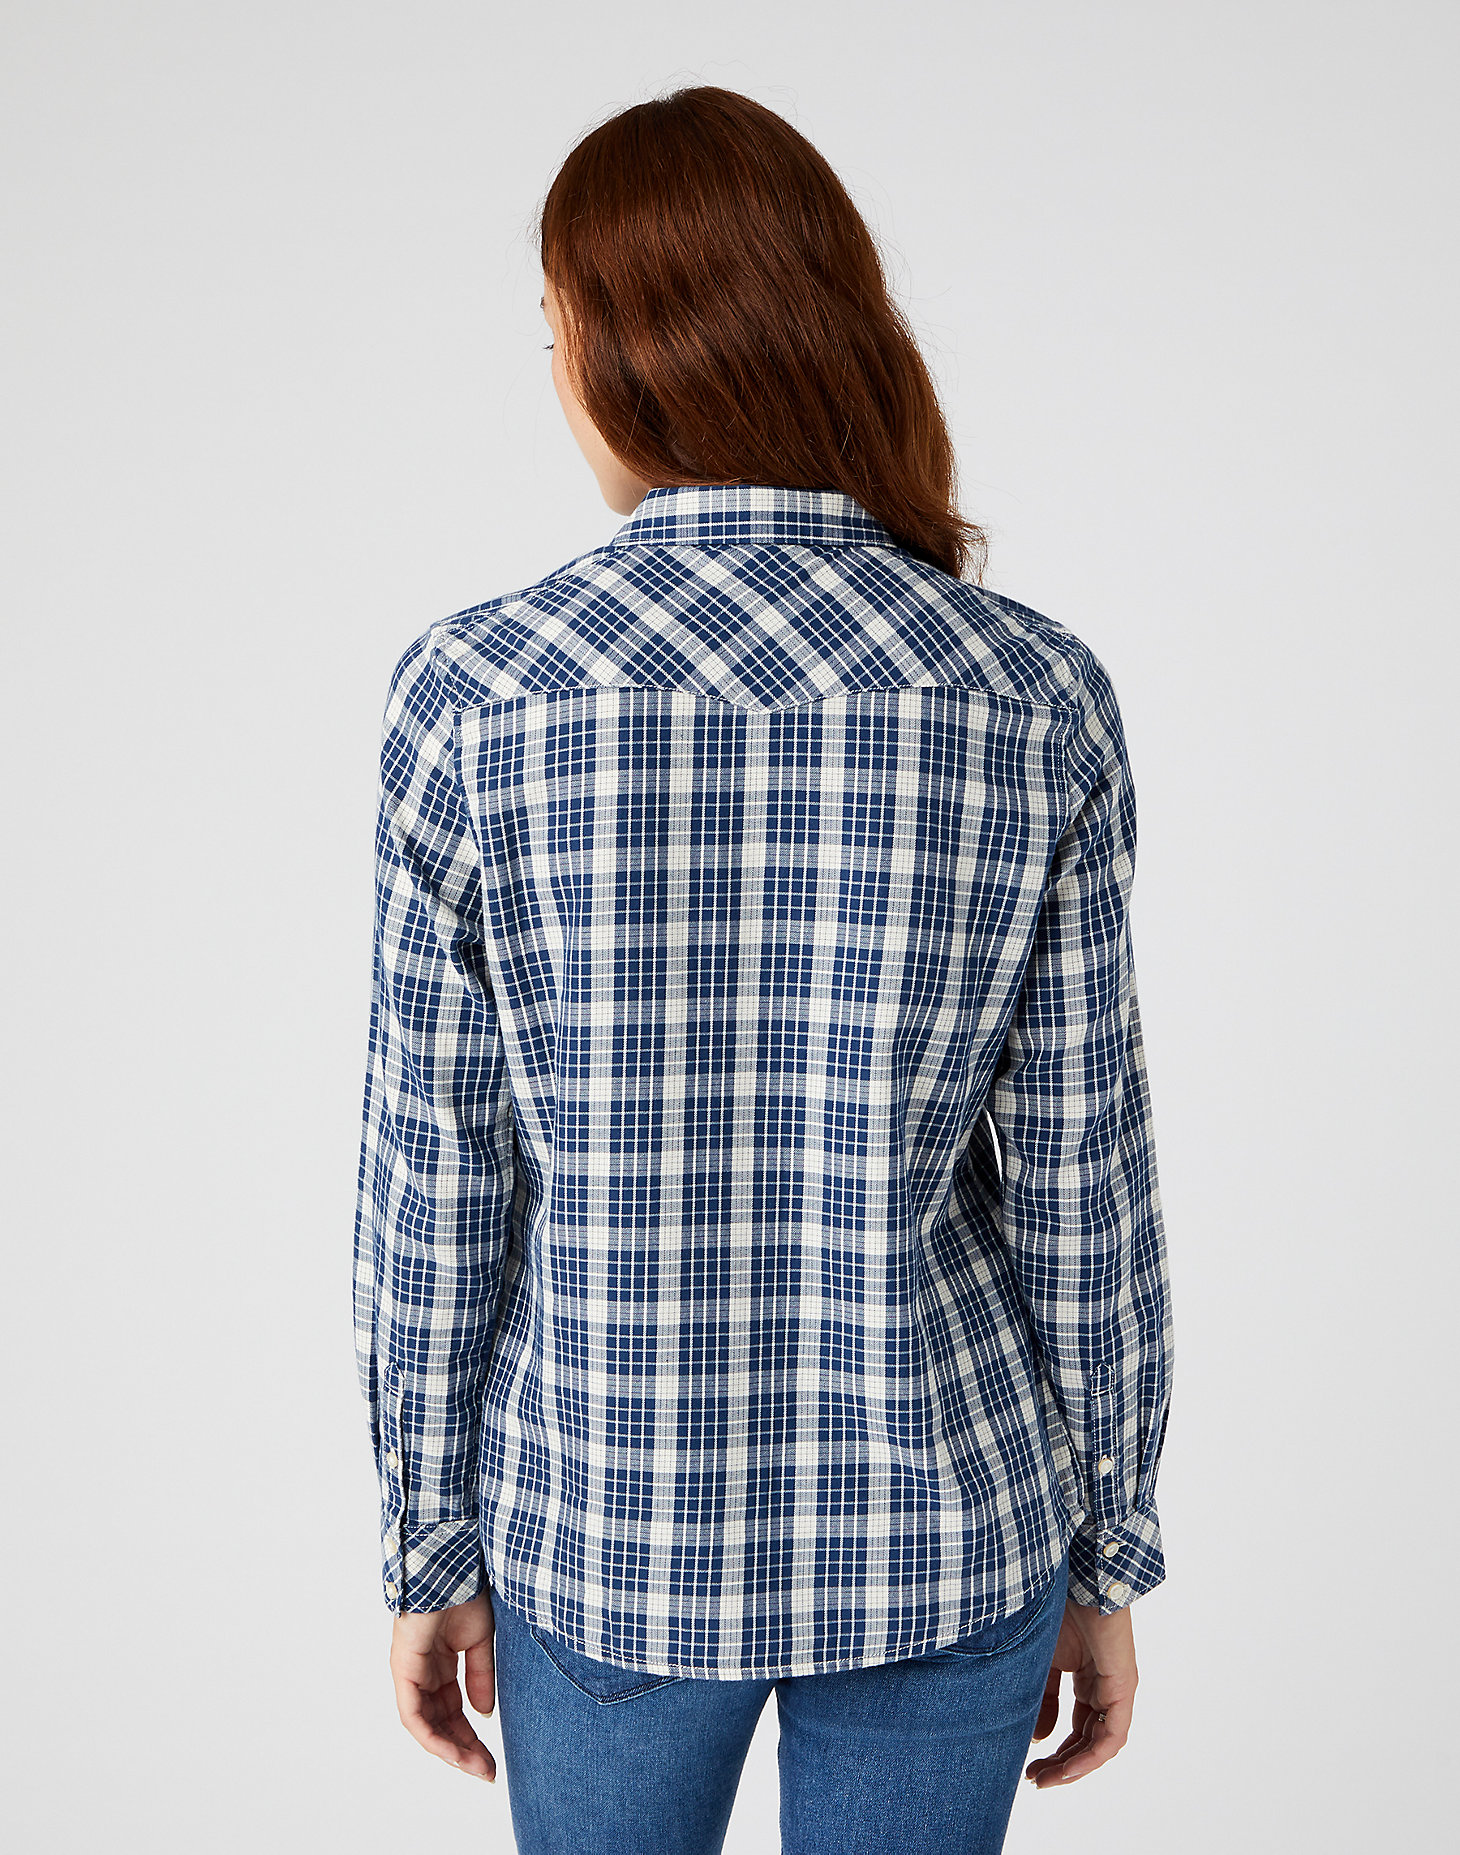 Western Check Shirt in Medieval Blue alternative view 2